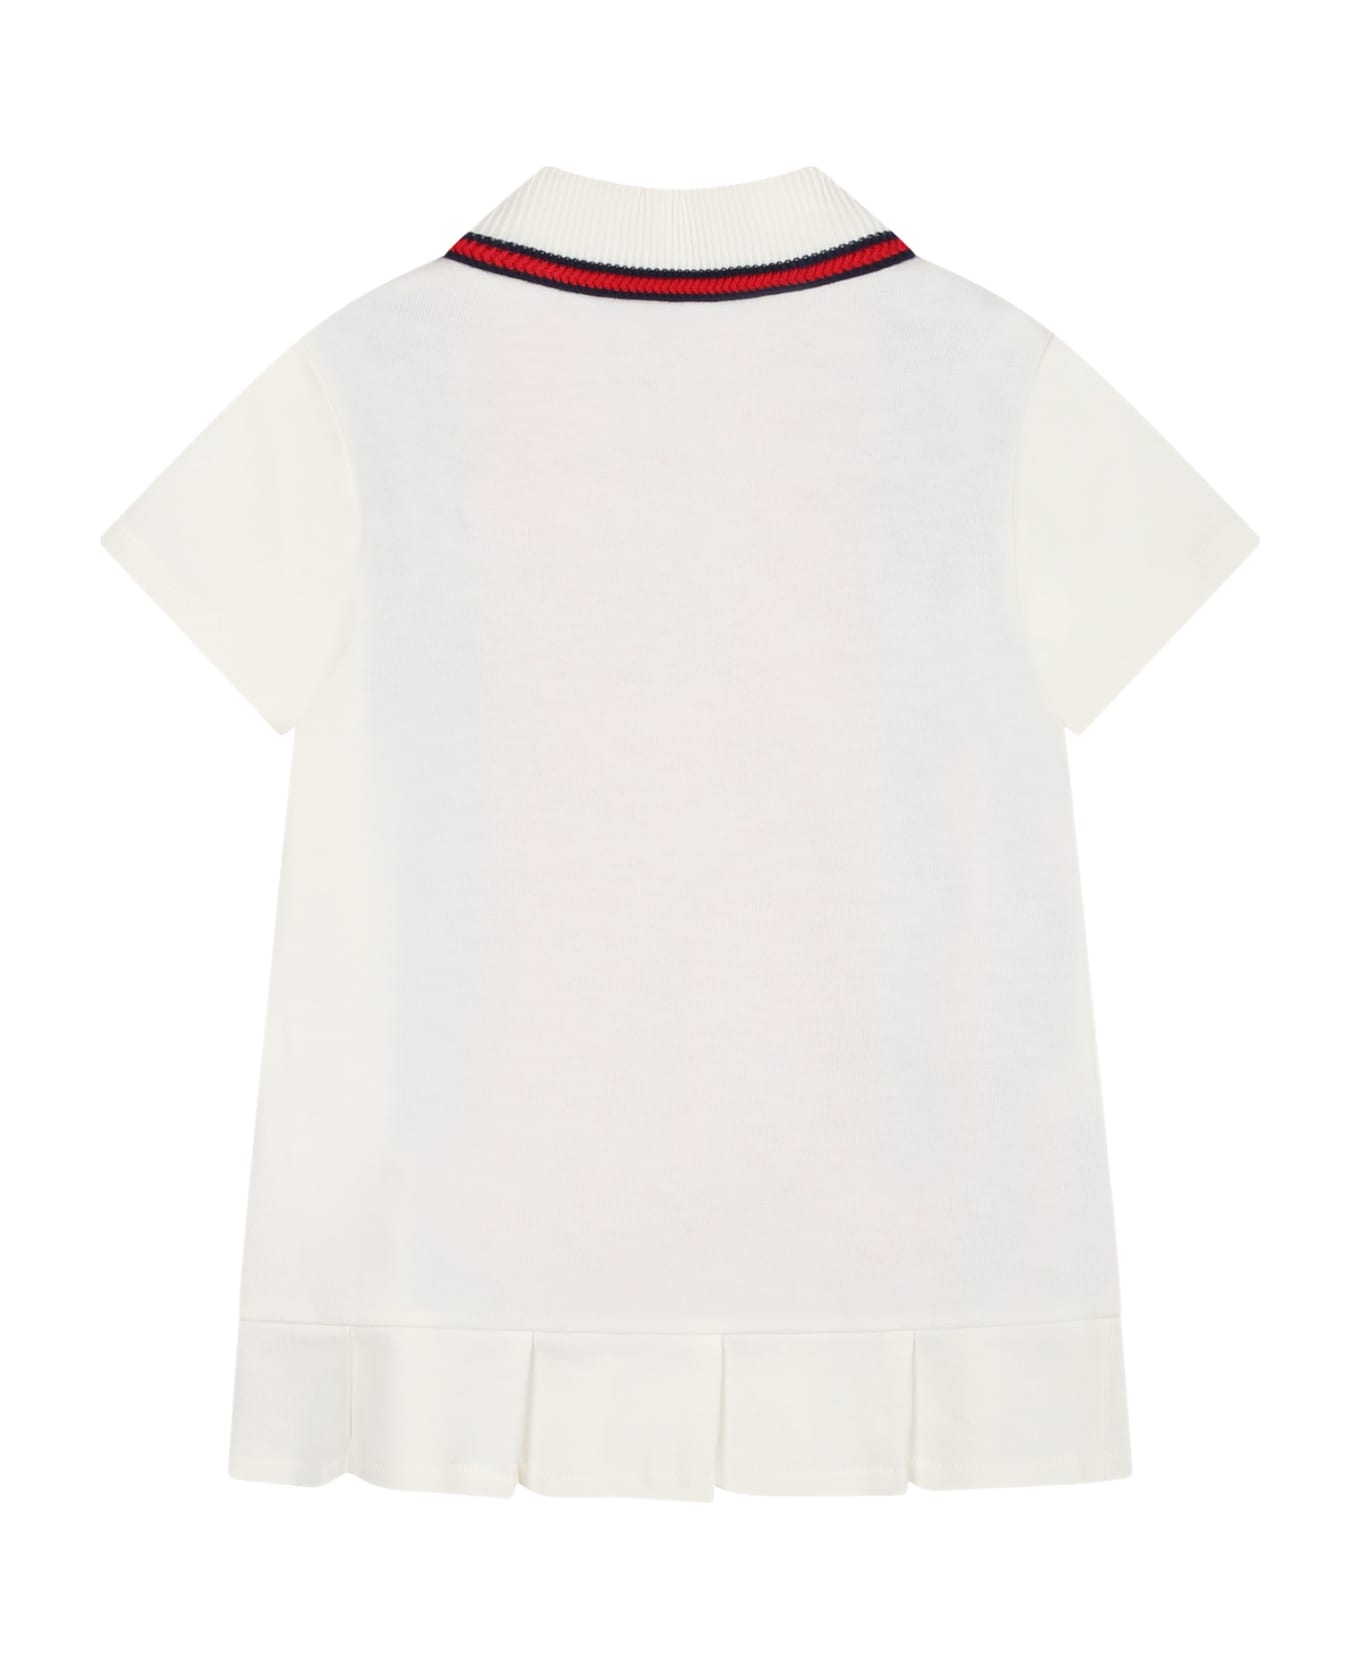 Gucci White Dress For Baby Girl With Blue And Red Bands - White ウェア